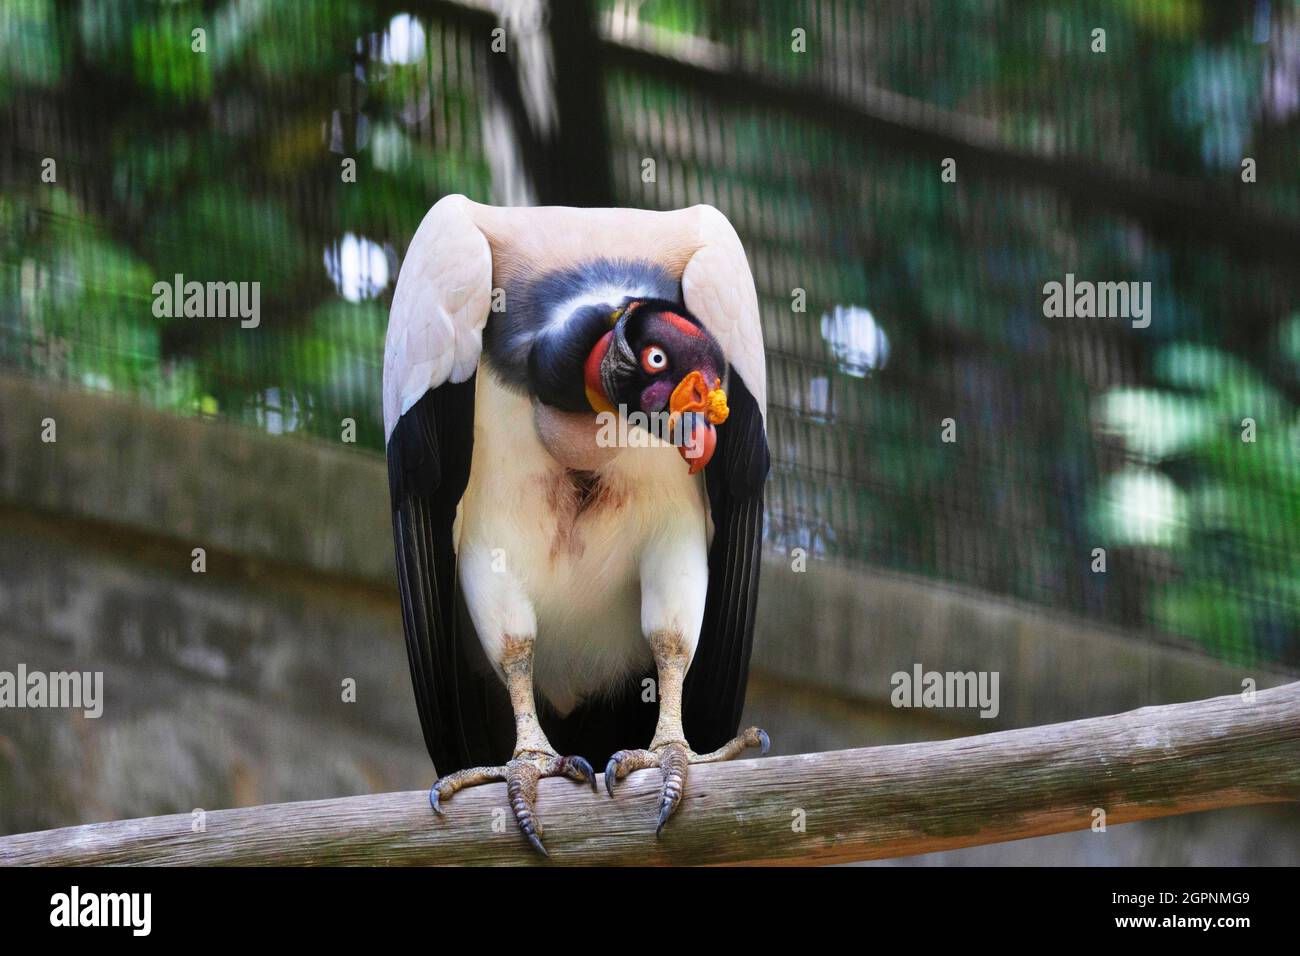 King vulture, Sarcoramphus papa. Lives predominantly in tropical lowland forests stretching from southern Mexico to northern Argentina Stock Photo